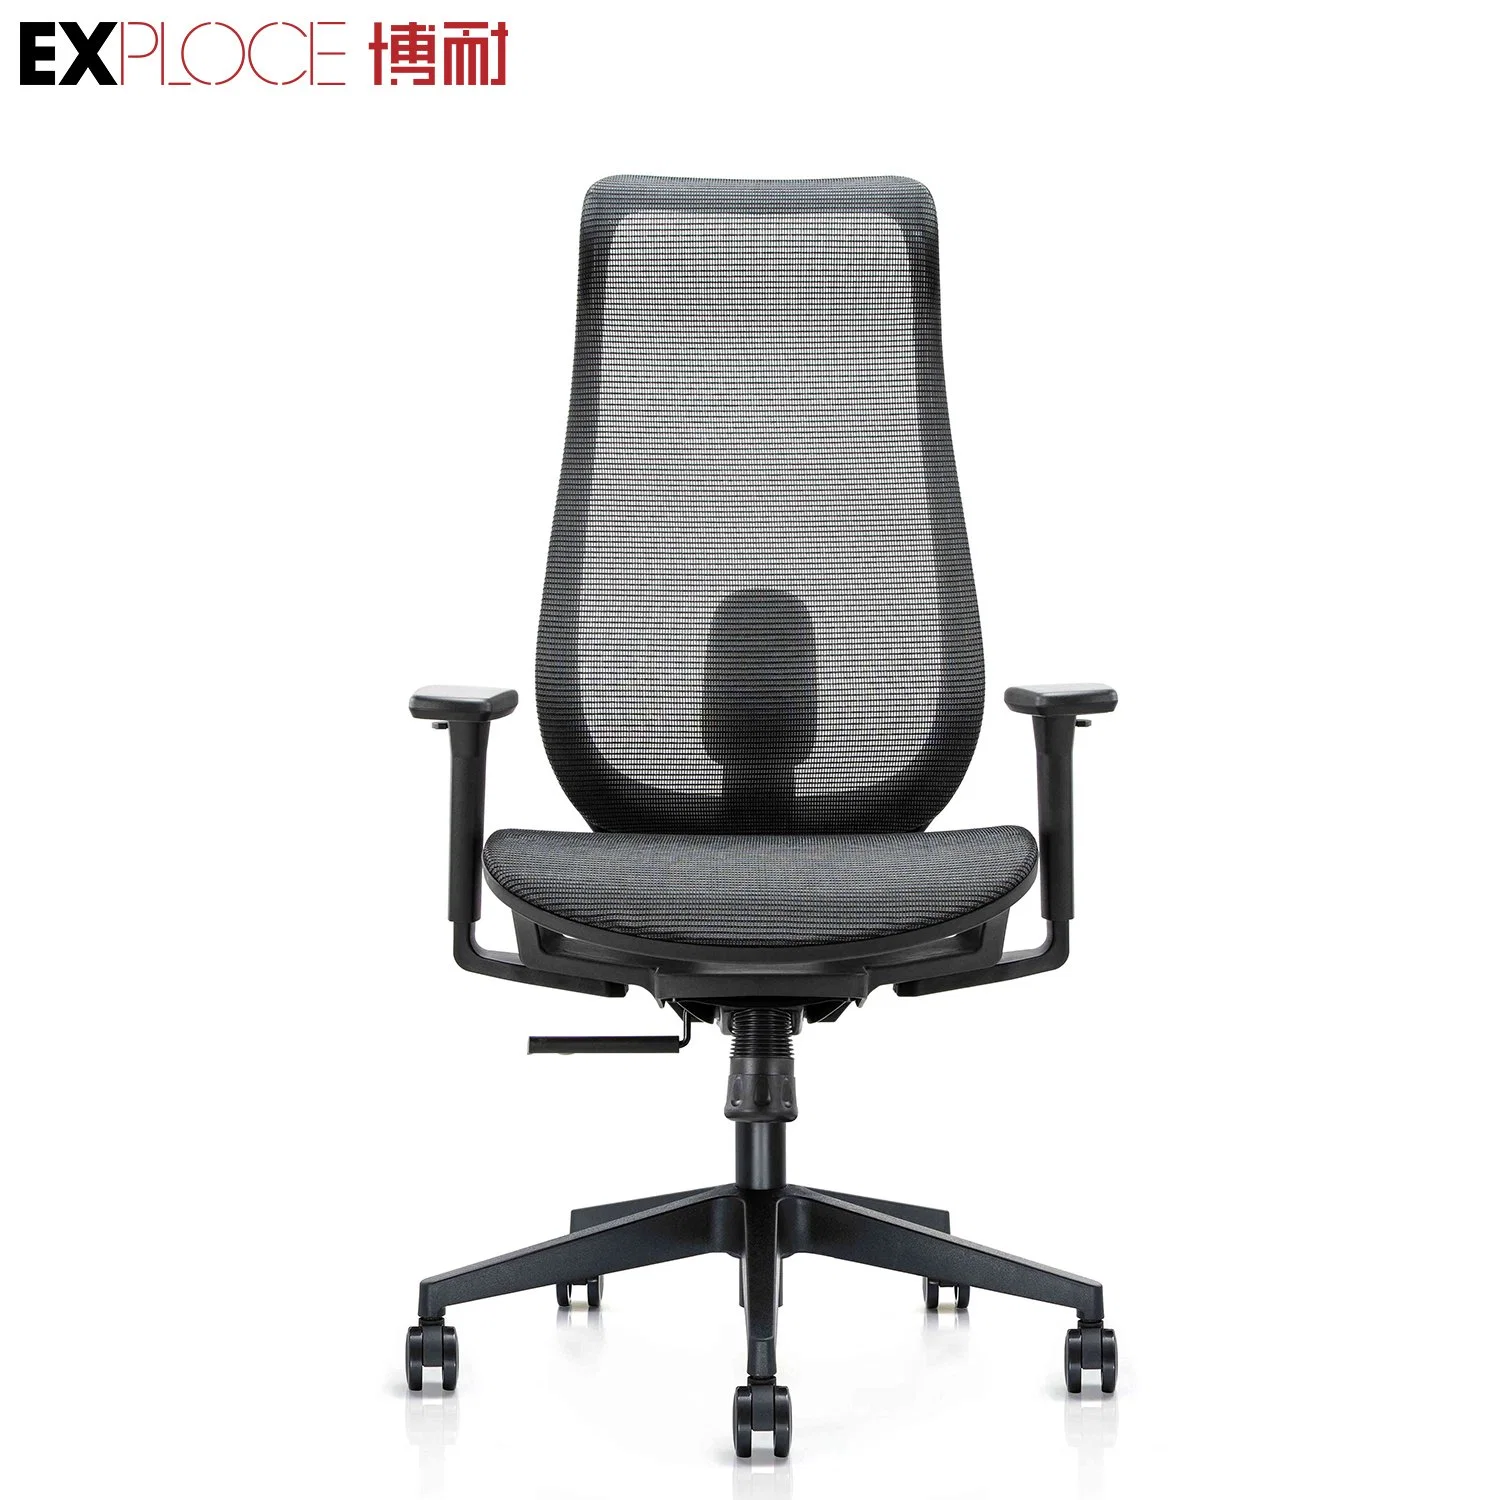 Best Price Cheap Mesh Chair Ergonomic Office Chair with Adjustable Headrest